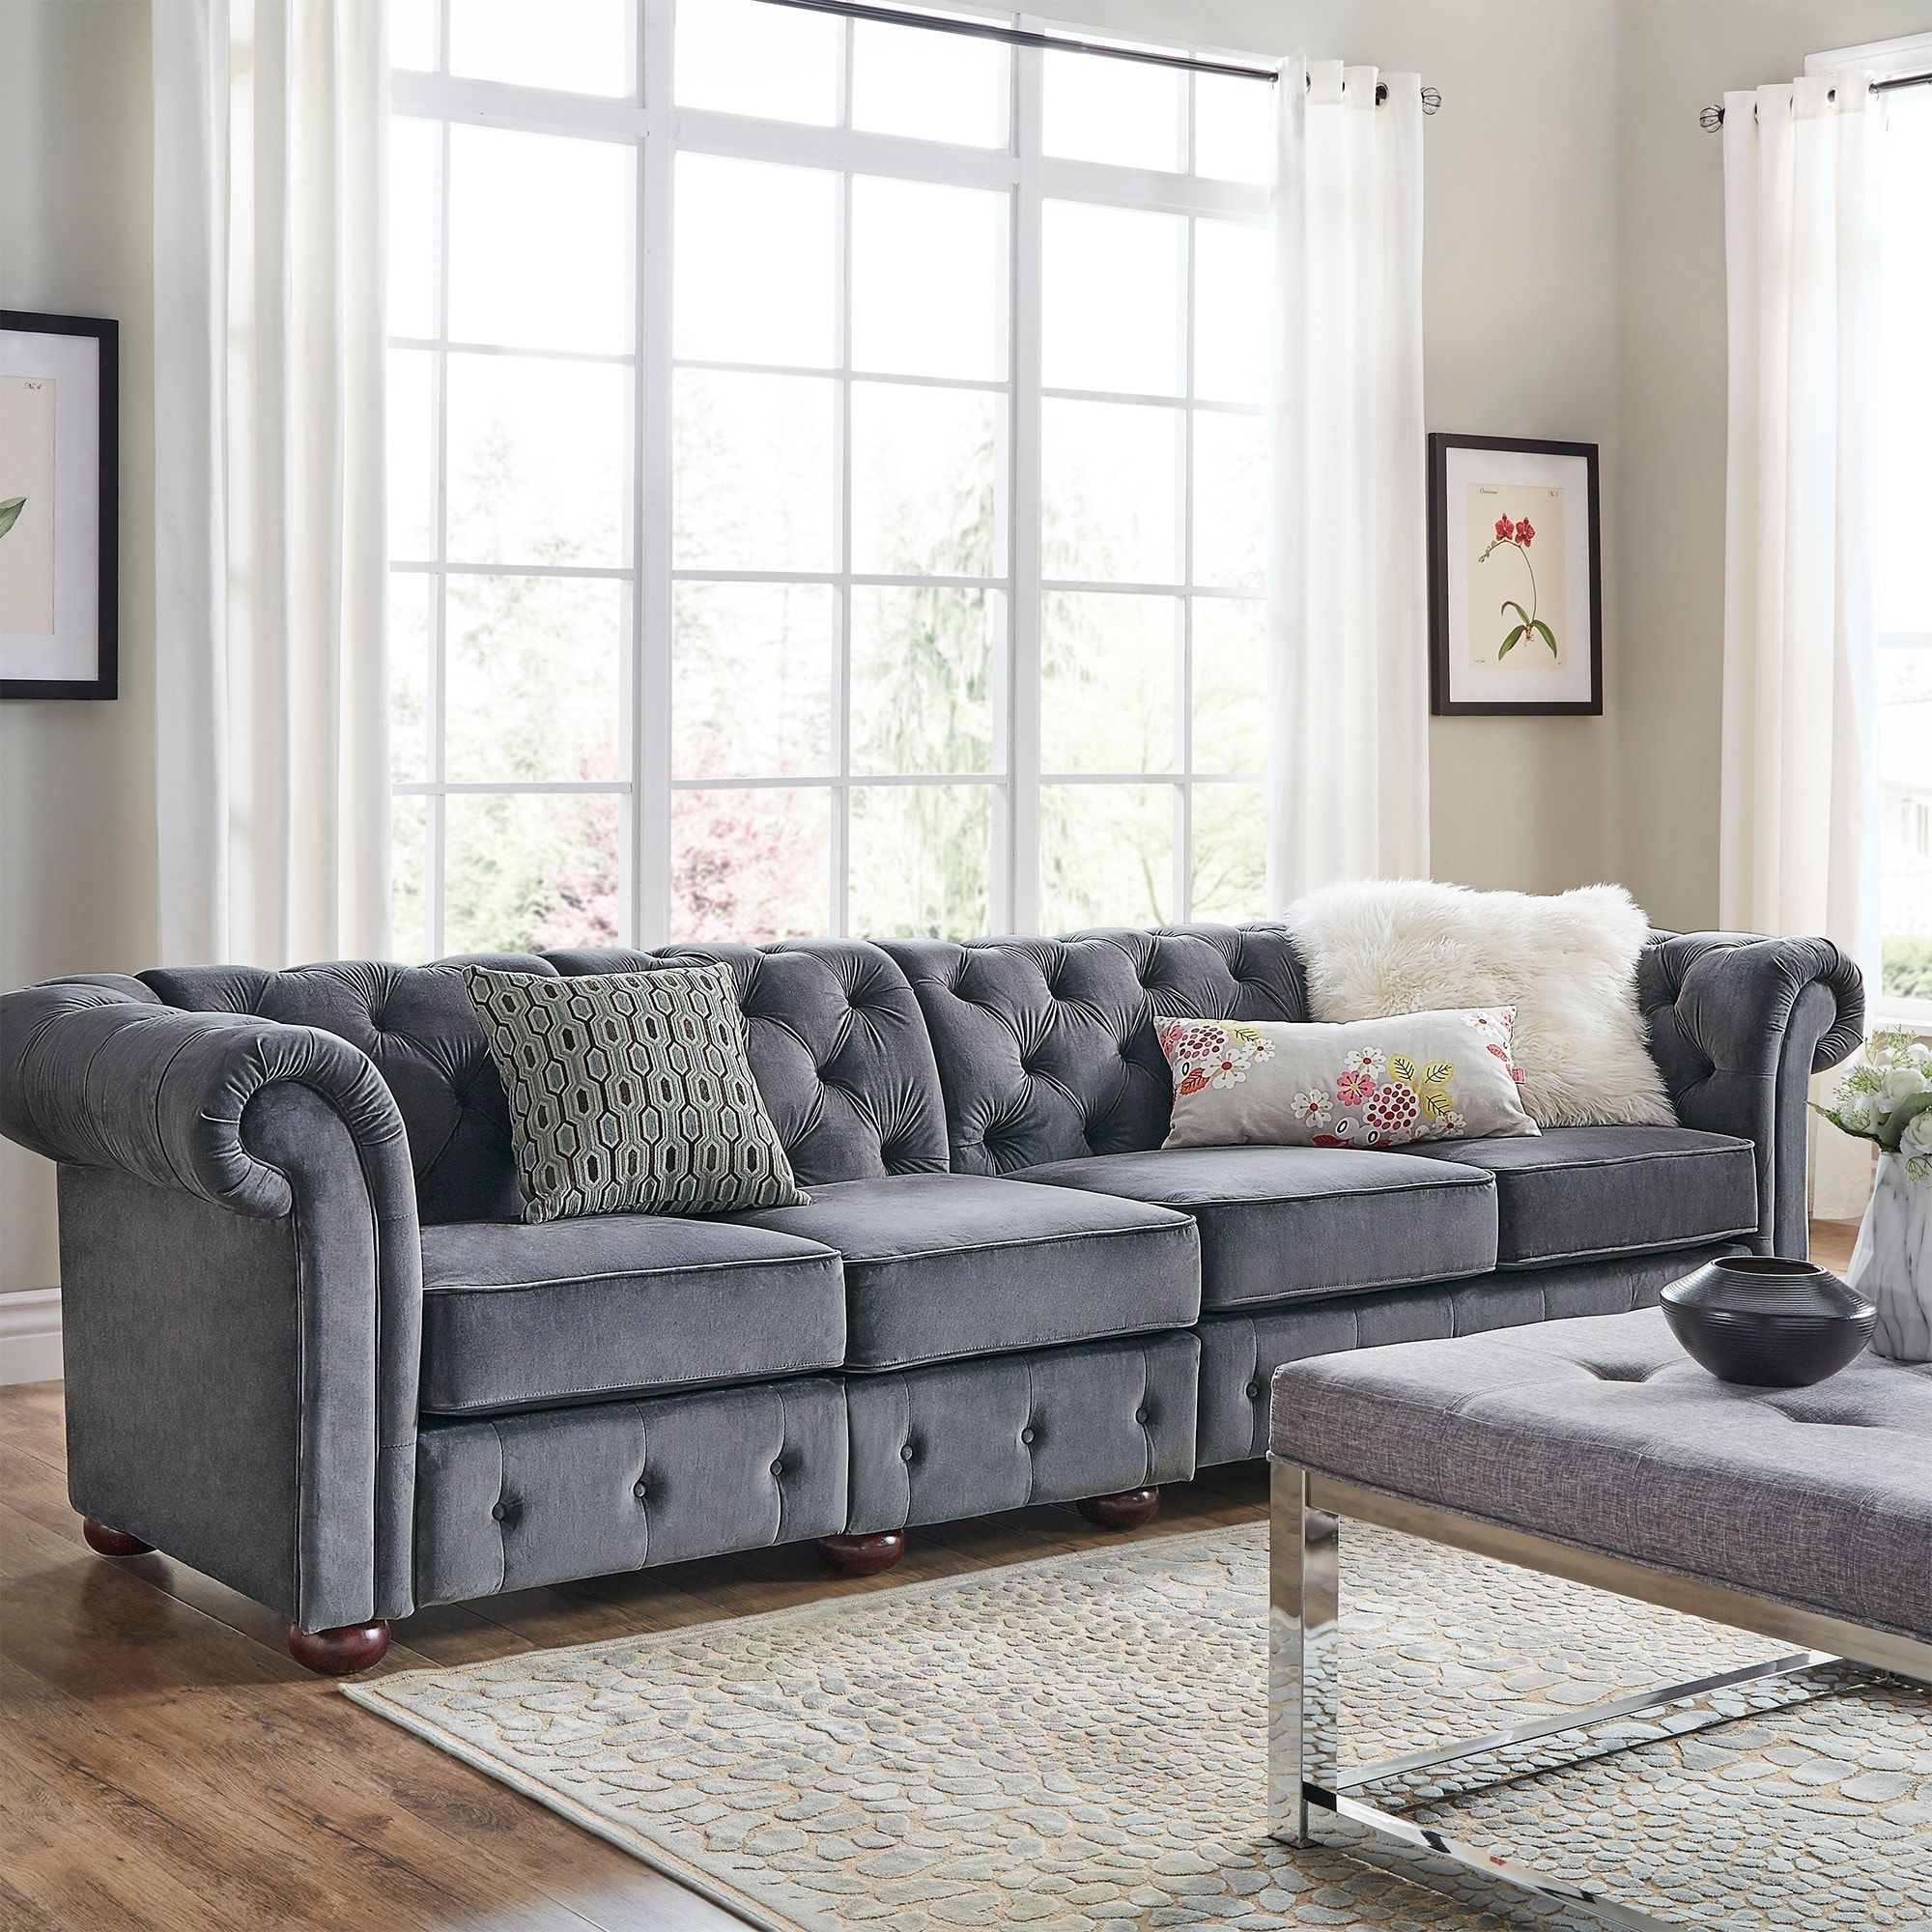 Sofas In Dark Grey With Well Known Knightsbridge Dark Grey Extra Long Tufted Chesterfield Sofainspire (View 13 of 15)